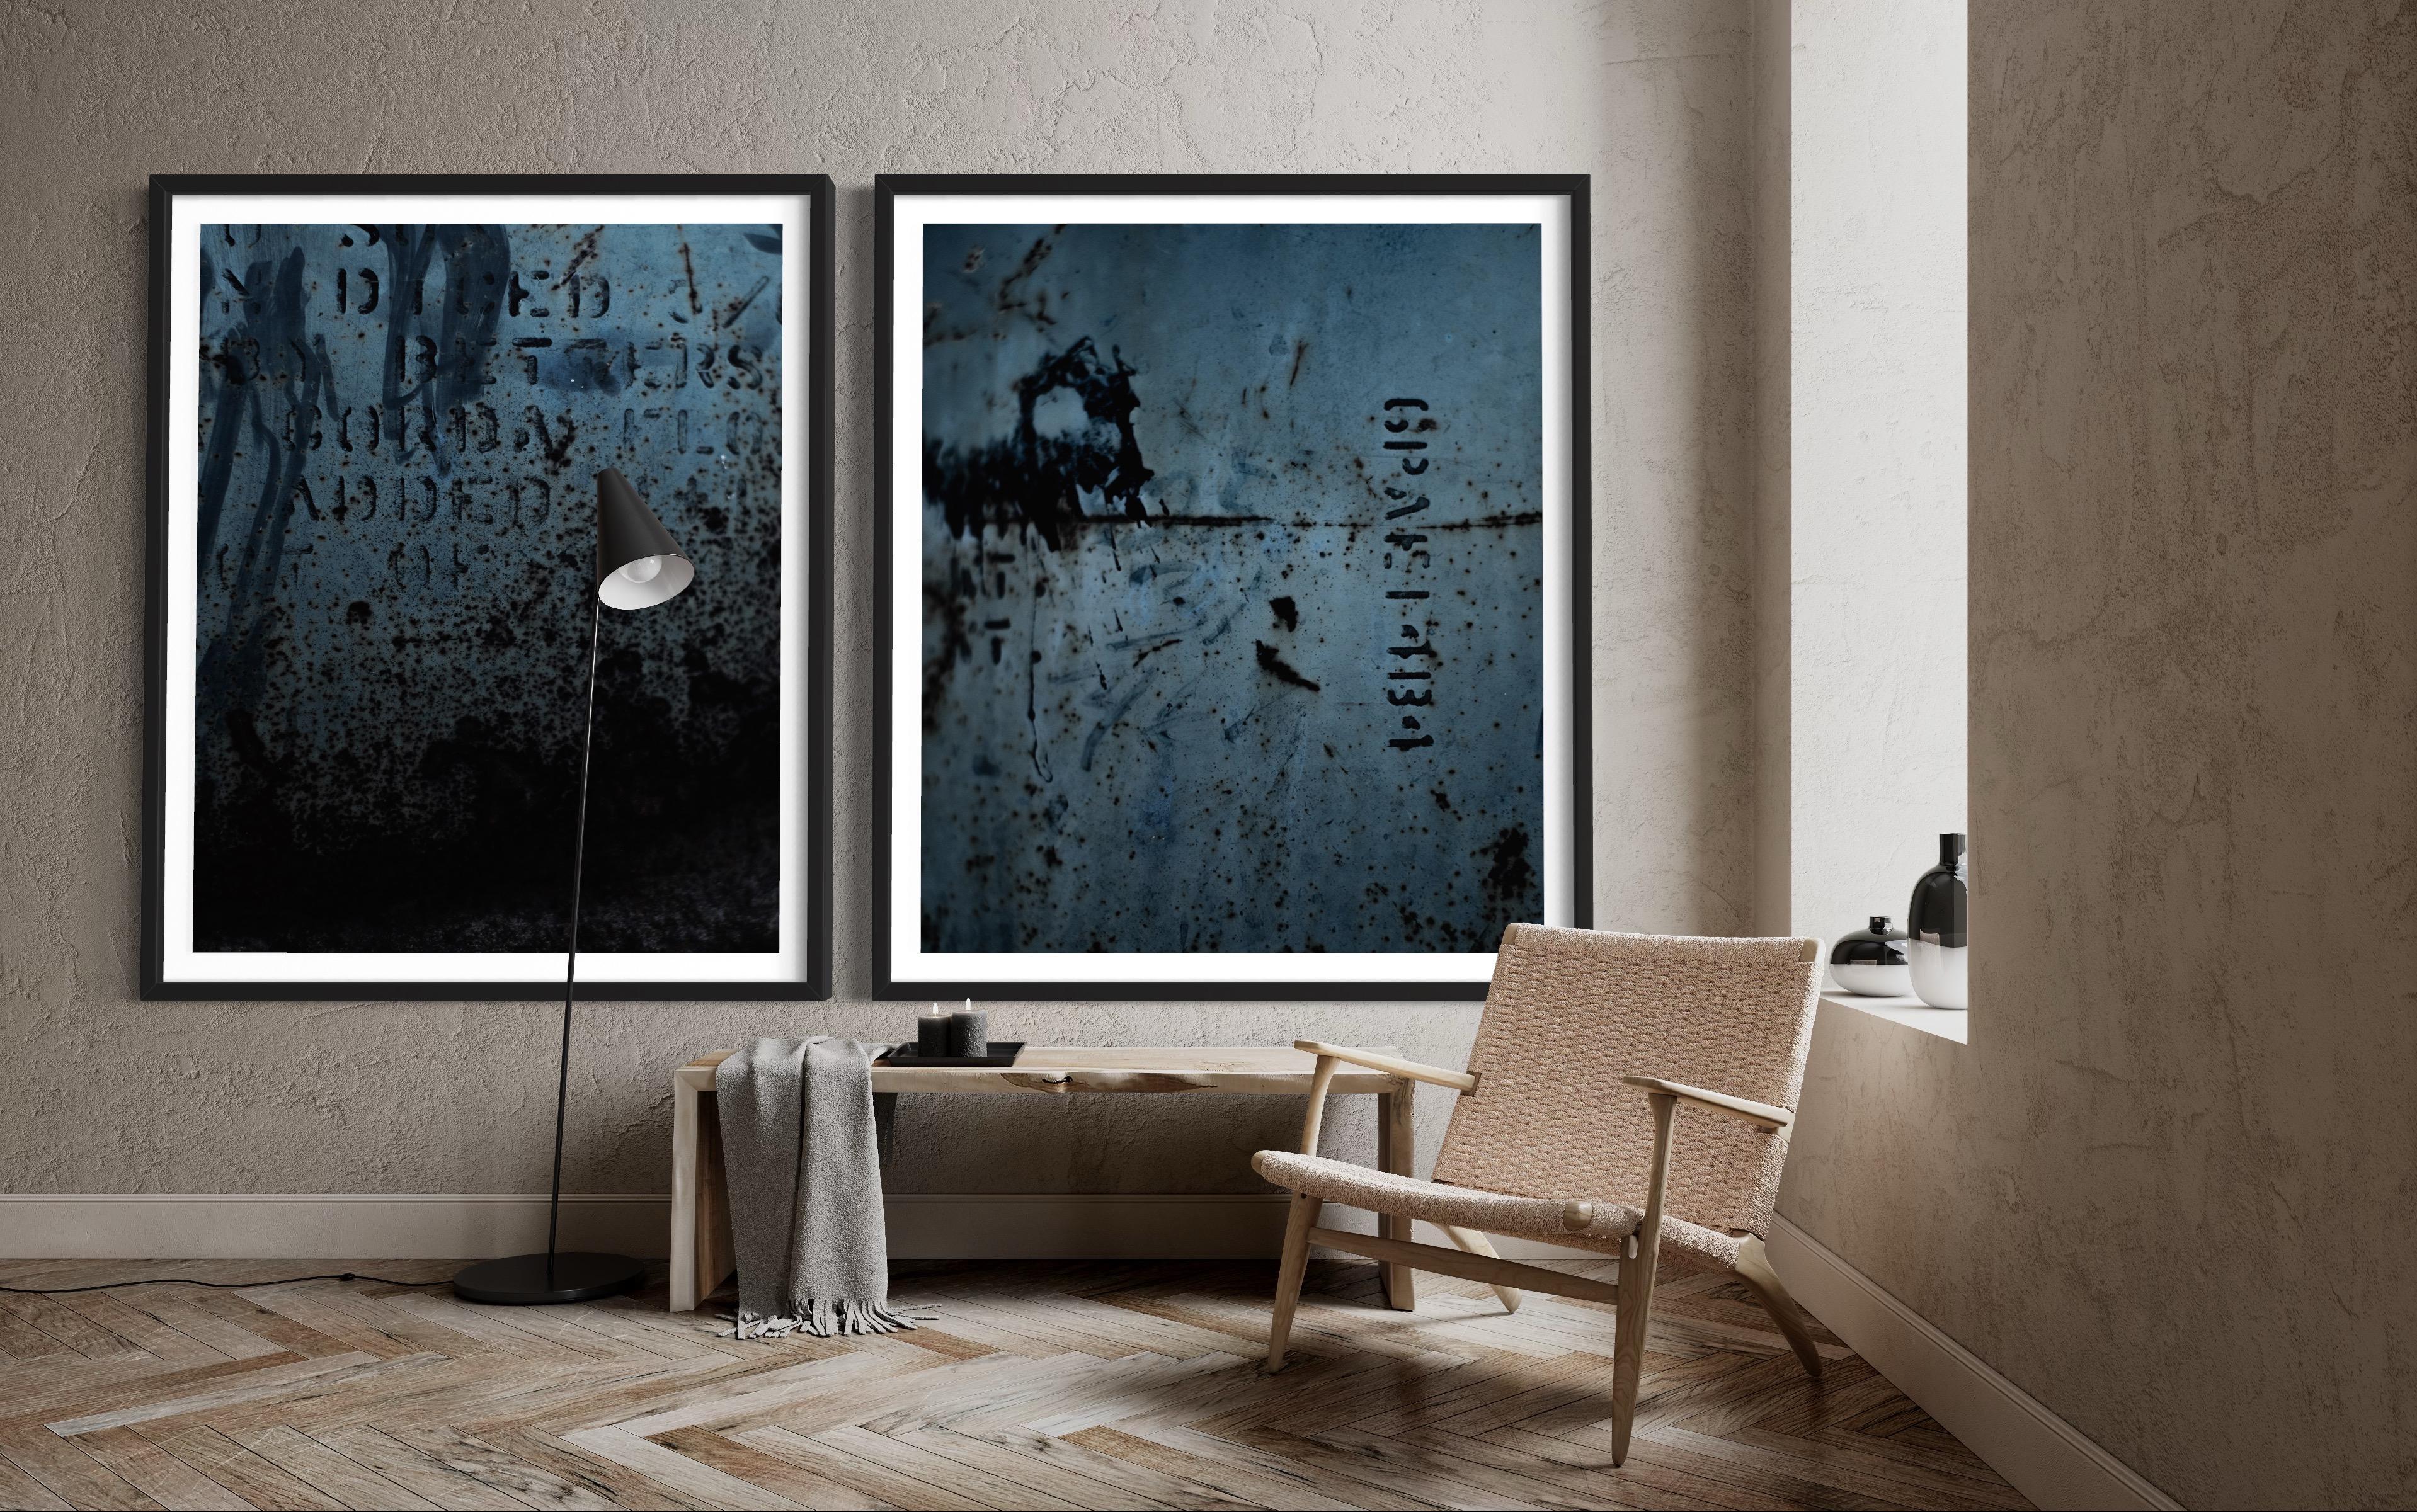 Addisonjones artwork, Etched Ash contemporary artwork

A R T I S T S T O R Y:
“As I walked back through the fields of my grandparents' farm before we sold it, a sense of nostalgia washed over me. Memories of my childhood flooded back, reminding me